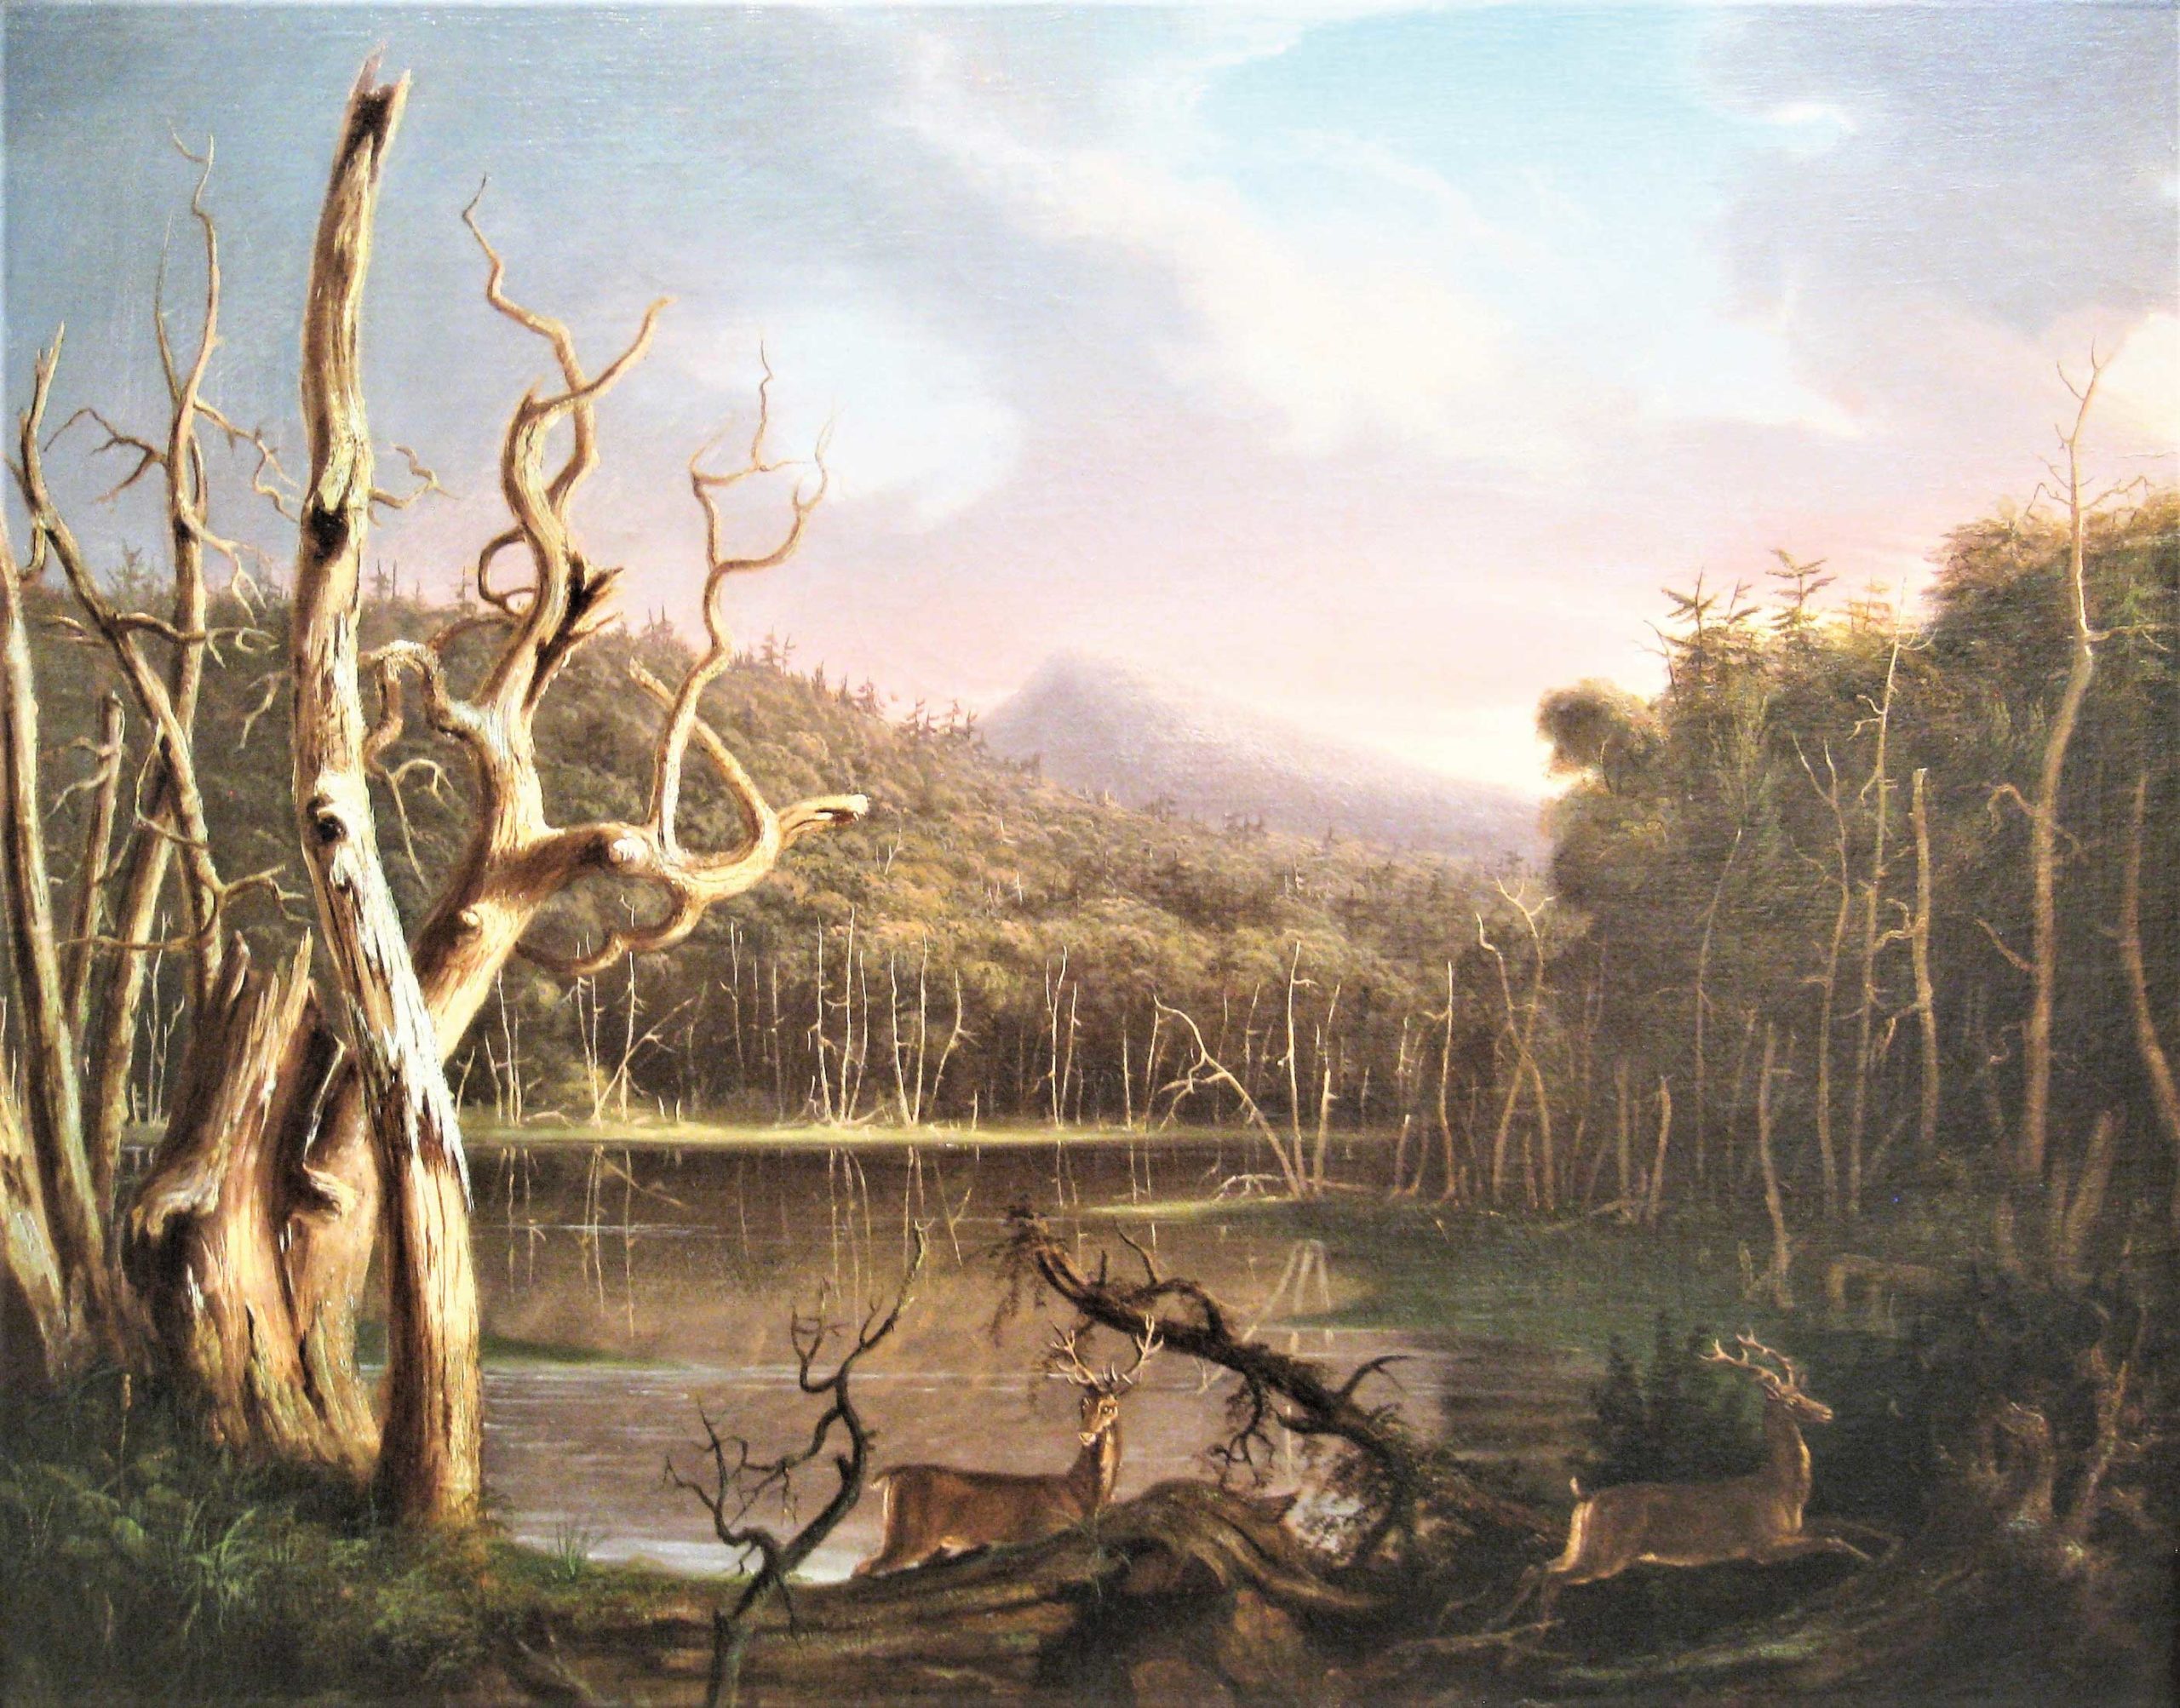 Lake with Dead Trees